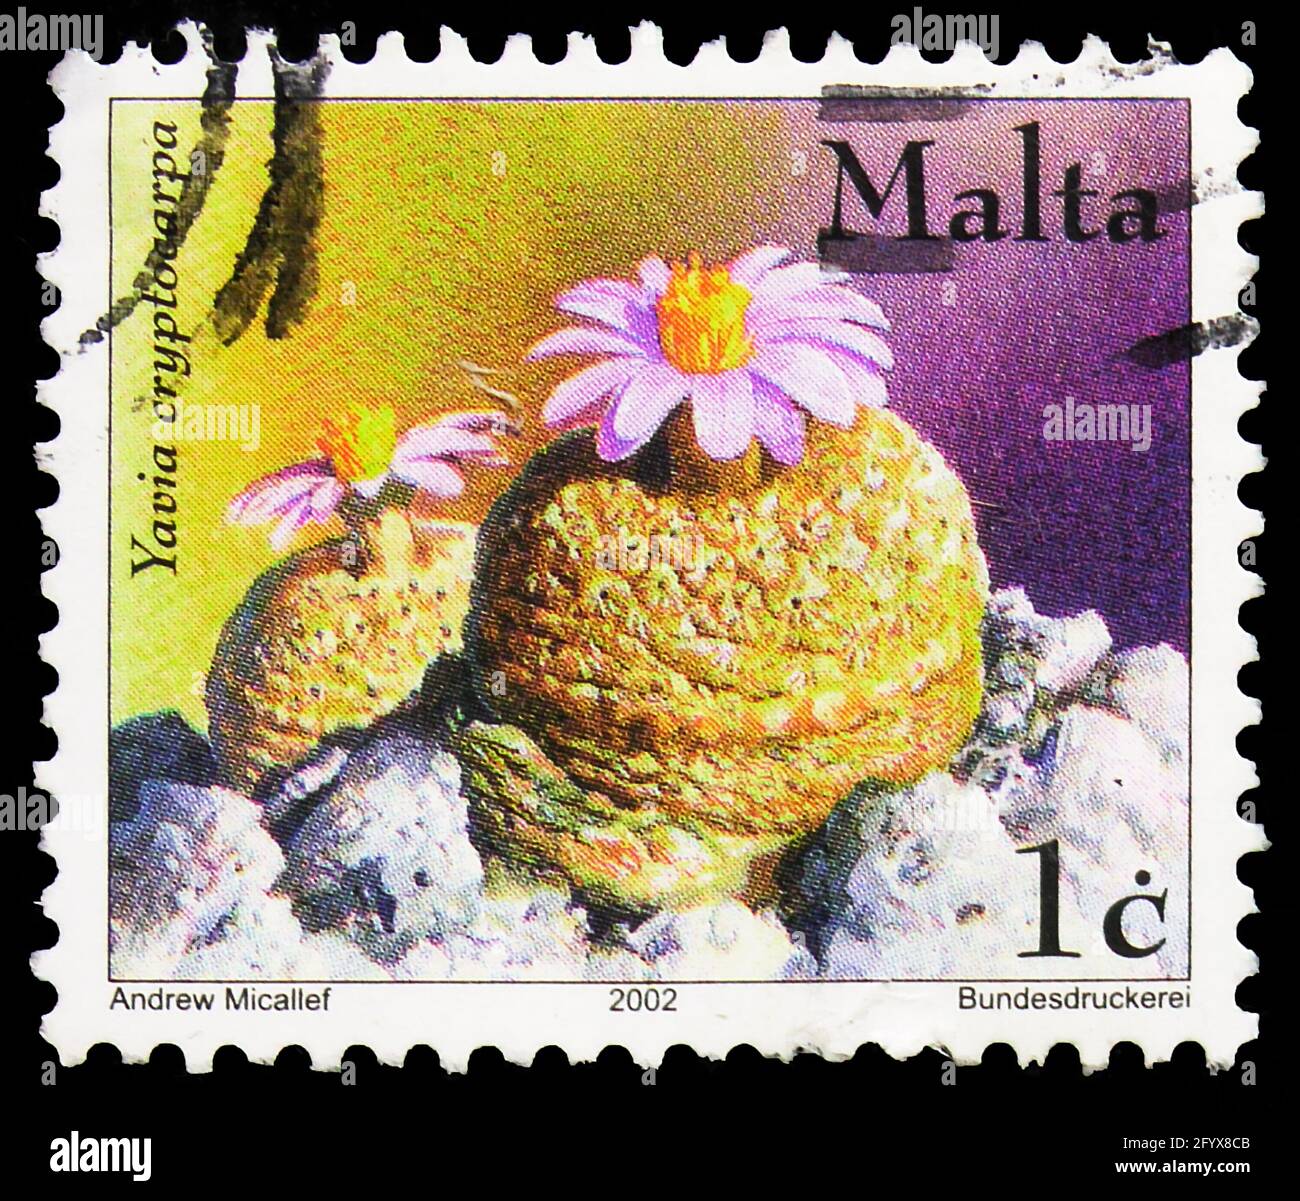 MOSCOW, RUSSIA - SEPTEMBER 27, 2019: Postage stamp printed in Malta shows Yavia cryptocarpa (cactus), 1 Maltese cent, Cacti and Succulents serie, circ Stock Photo